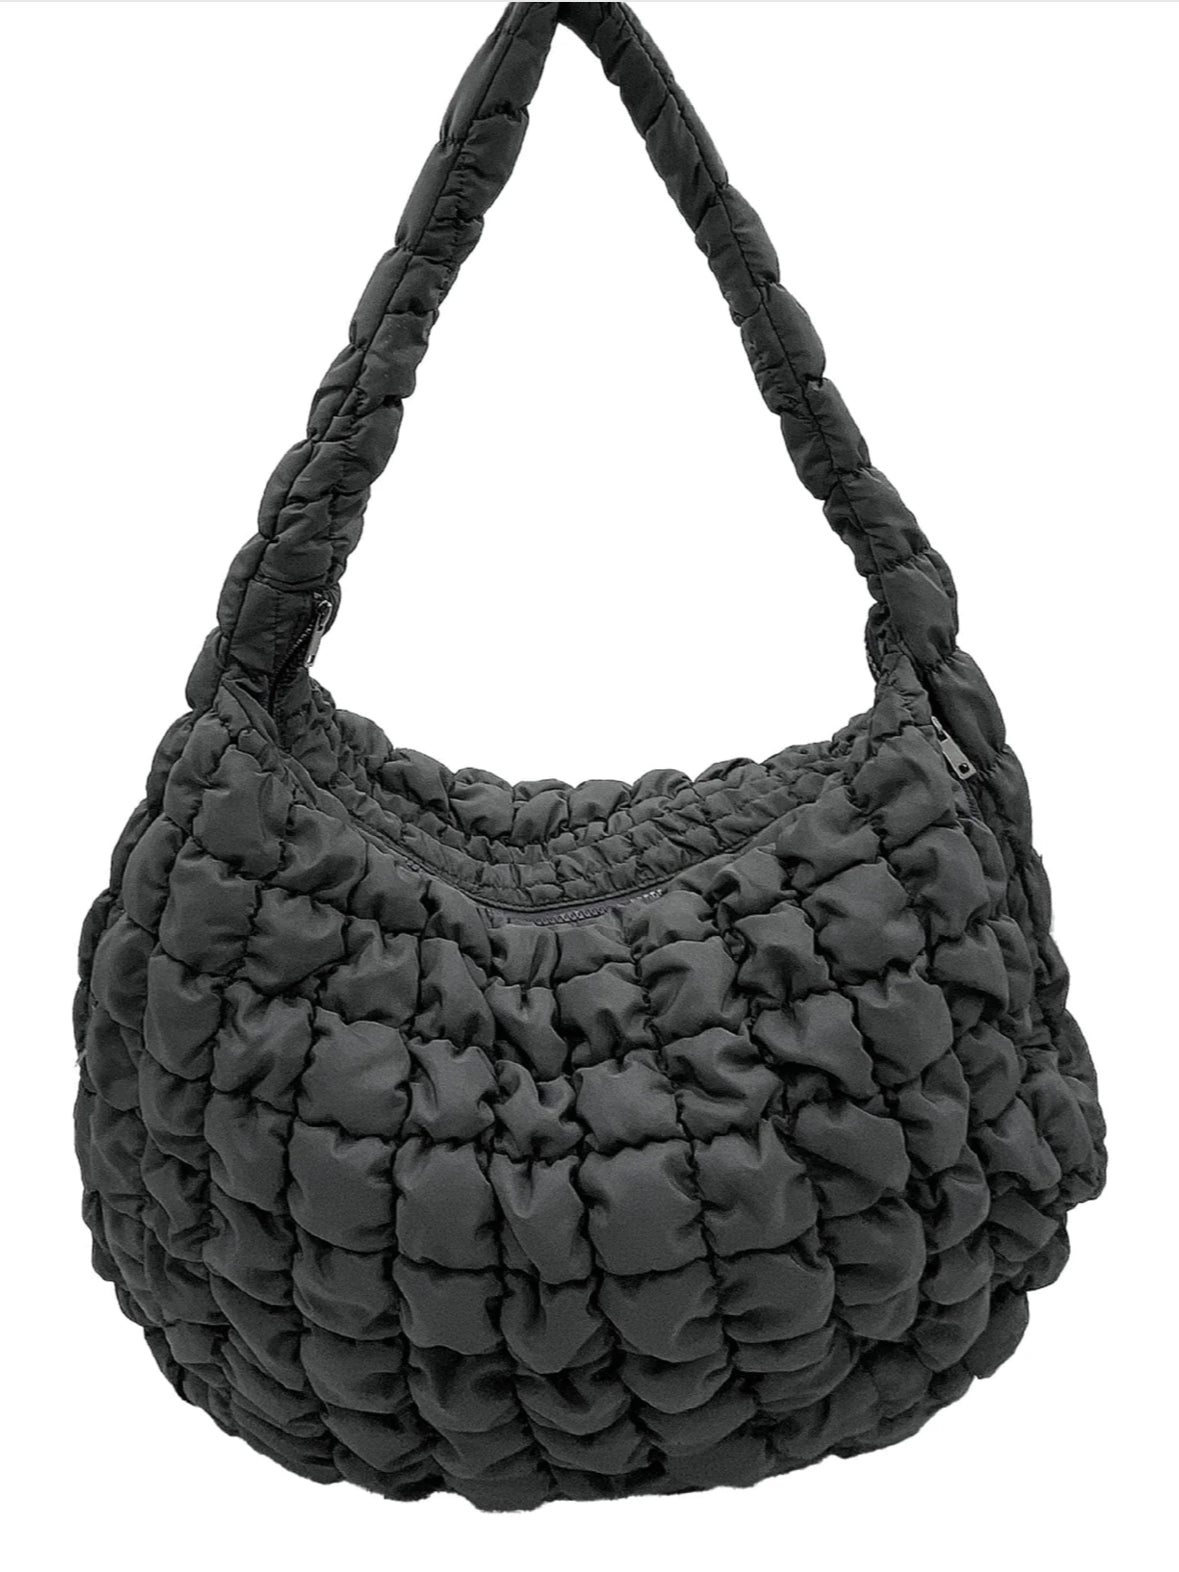 Quilted Puffer Tote